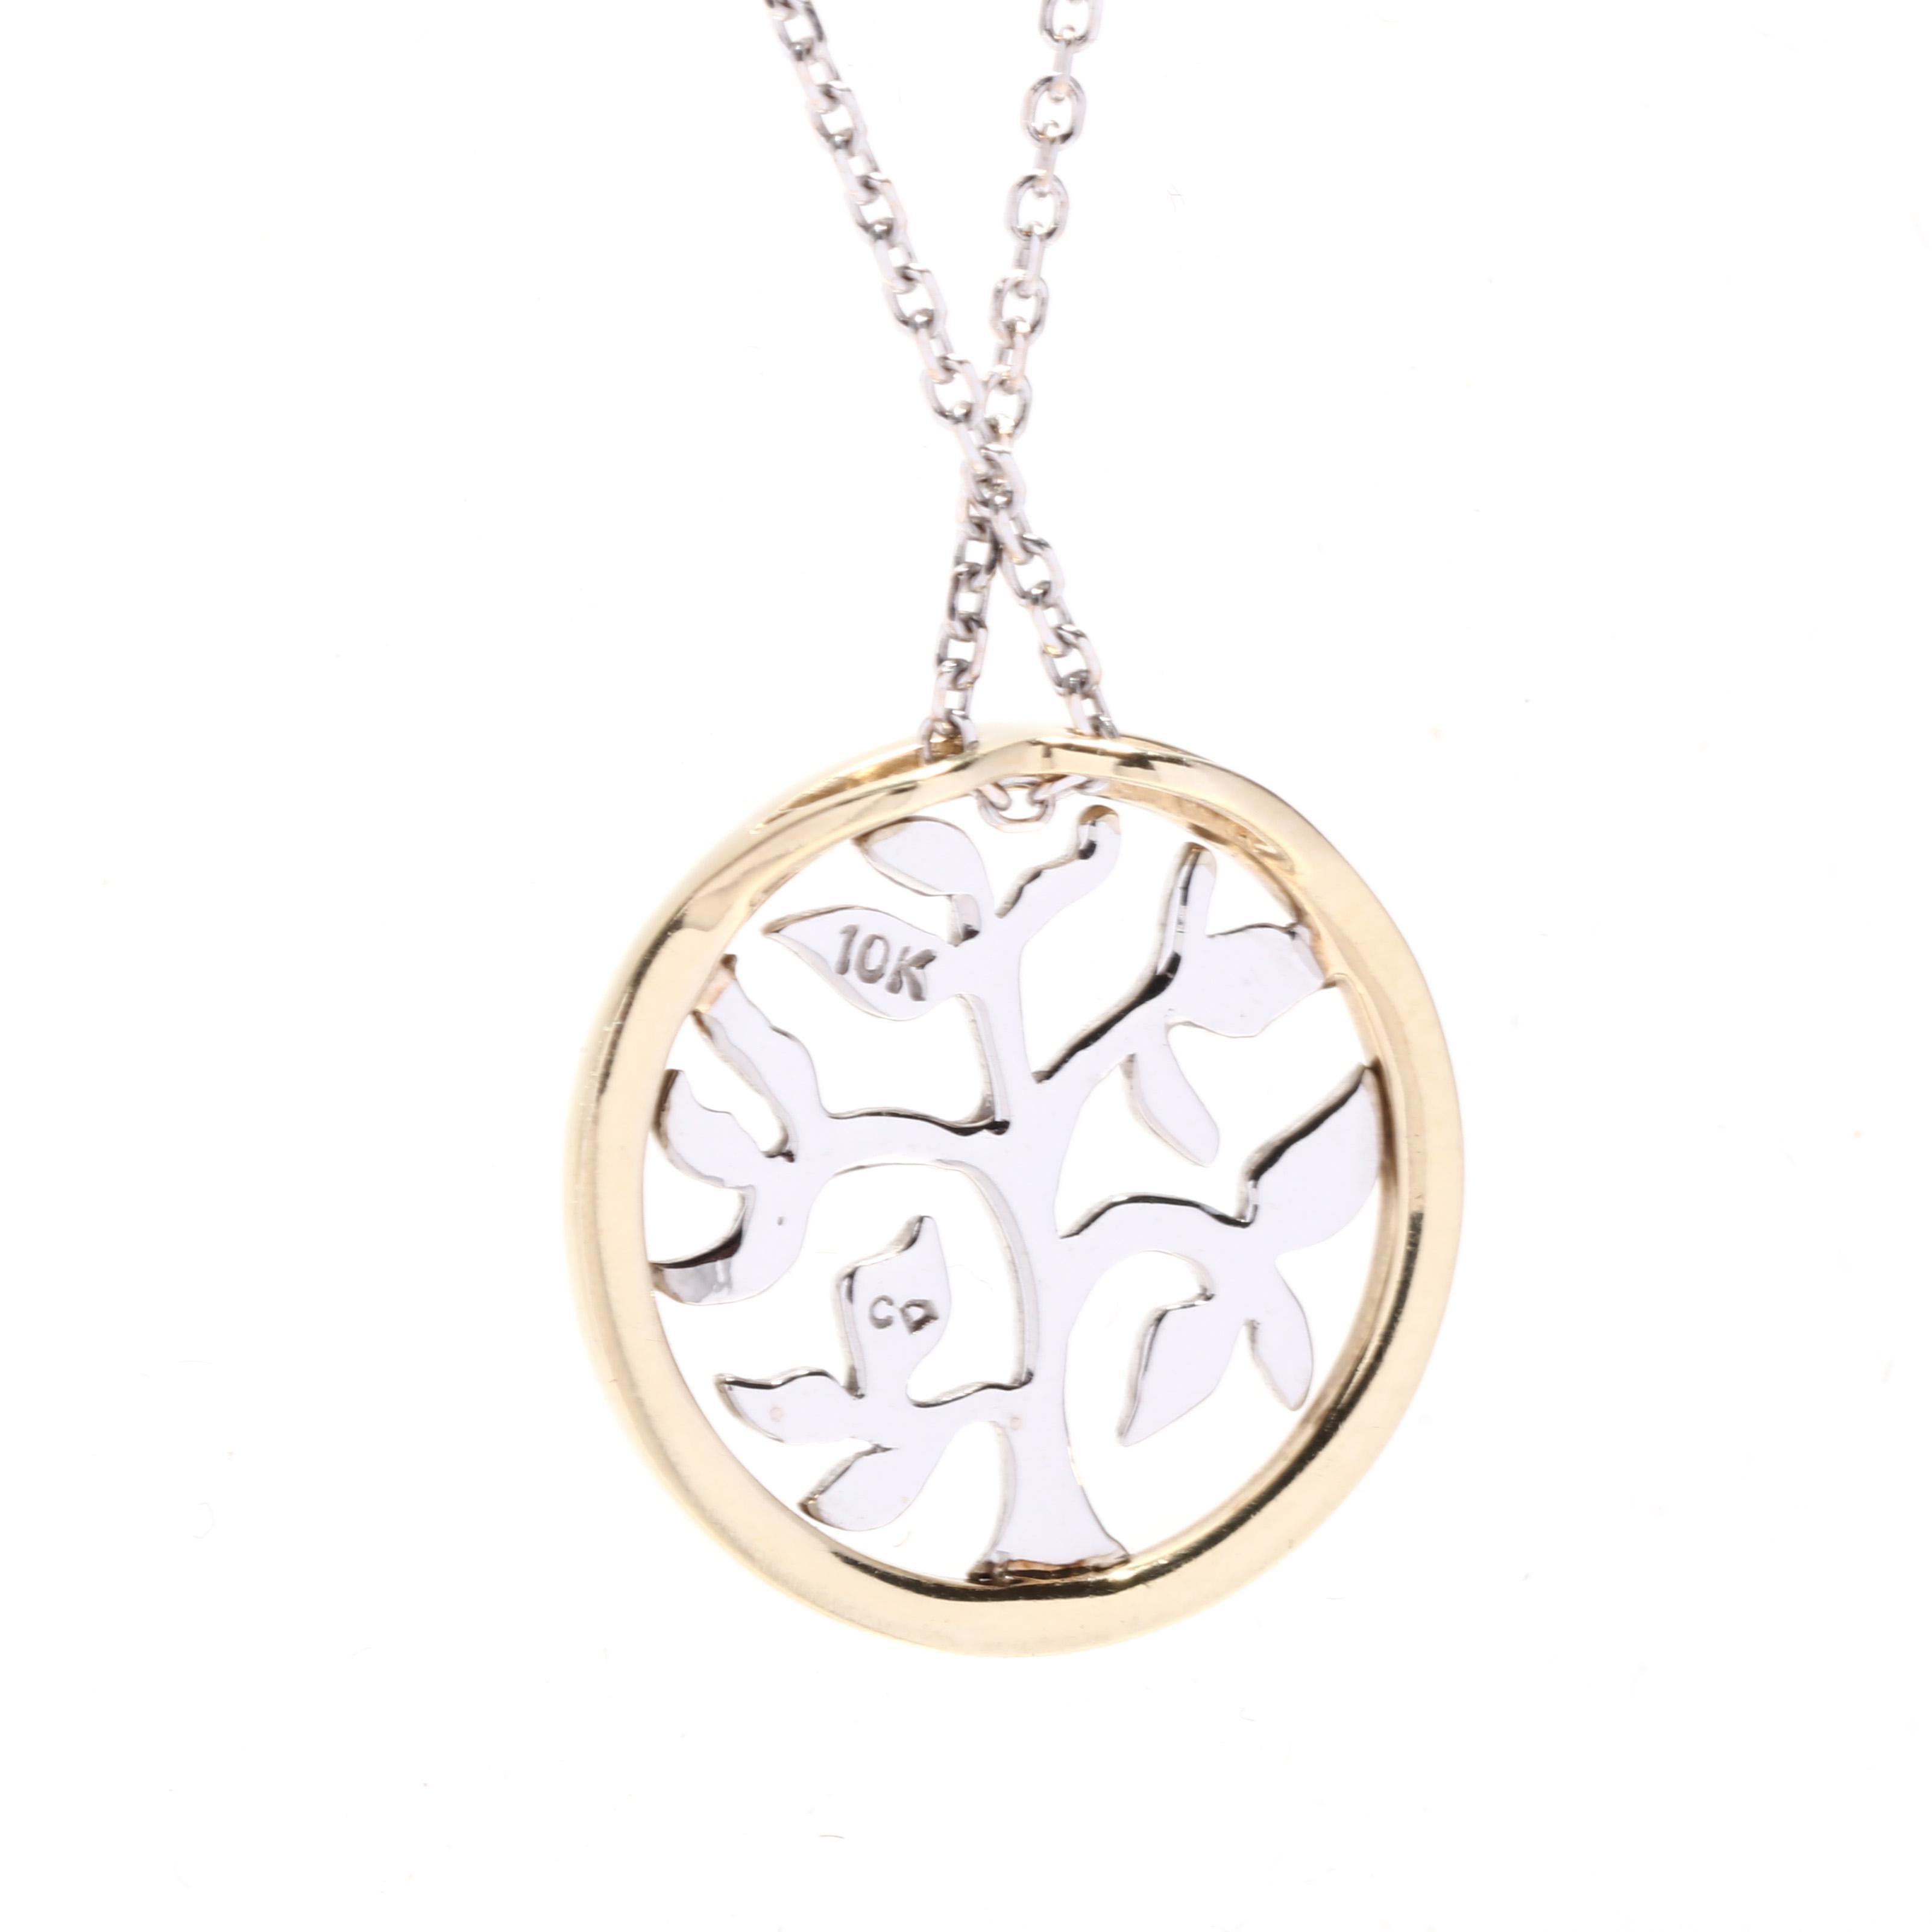 A vintage 10 karat yellow and white gold small tree of life pendant necklace. This simple round pendant features a white gold tree of life design cut out in with a yellow gold bezel and suspended from a thin cable chain.

Chain Length: 18 in.

Chain